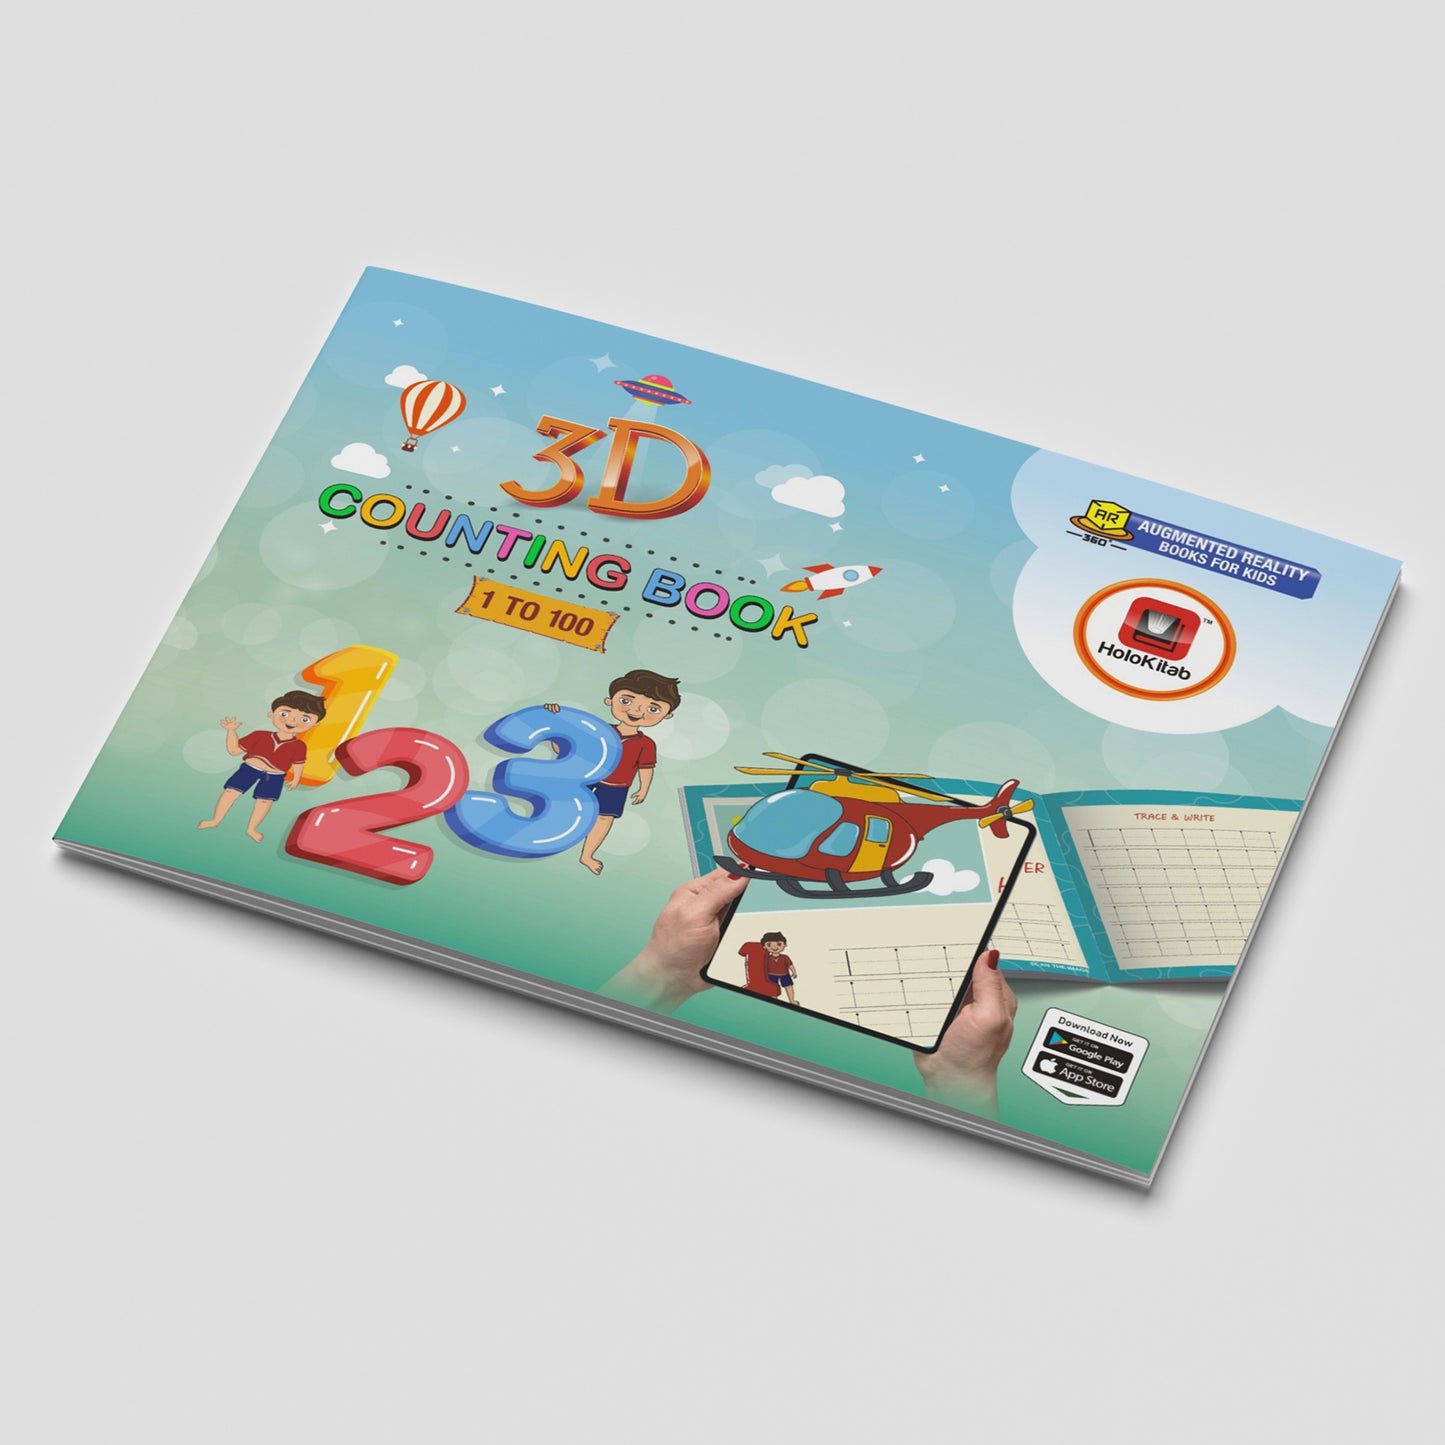 HoloKitab 3D Numbers Augmented Reality Book: Interactive Counting 123 Experience (1-100) for Kids with Free App | Educational Writing & Math Practice